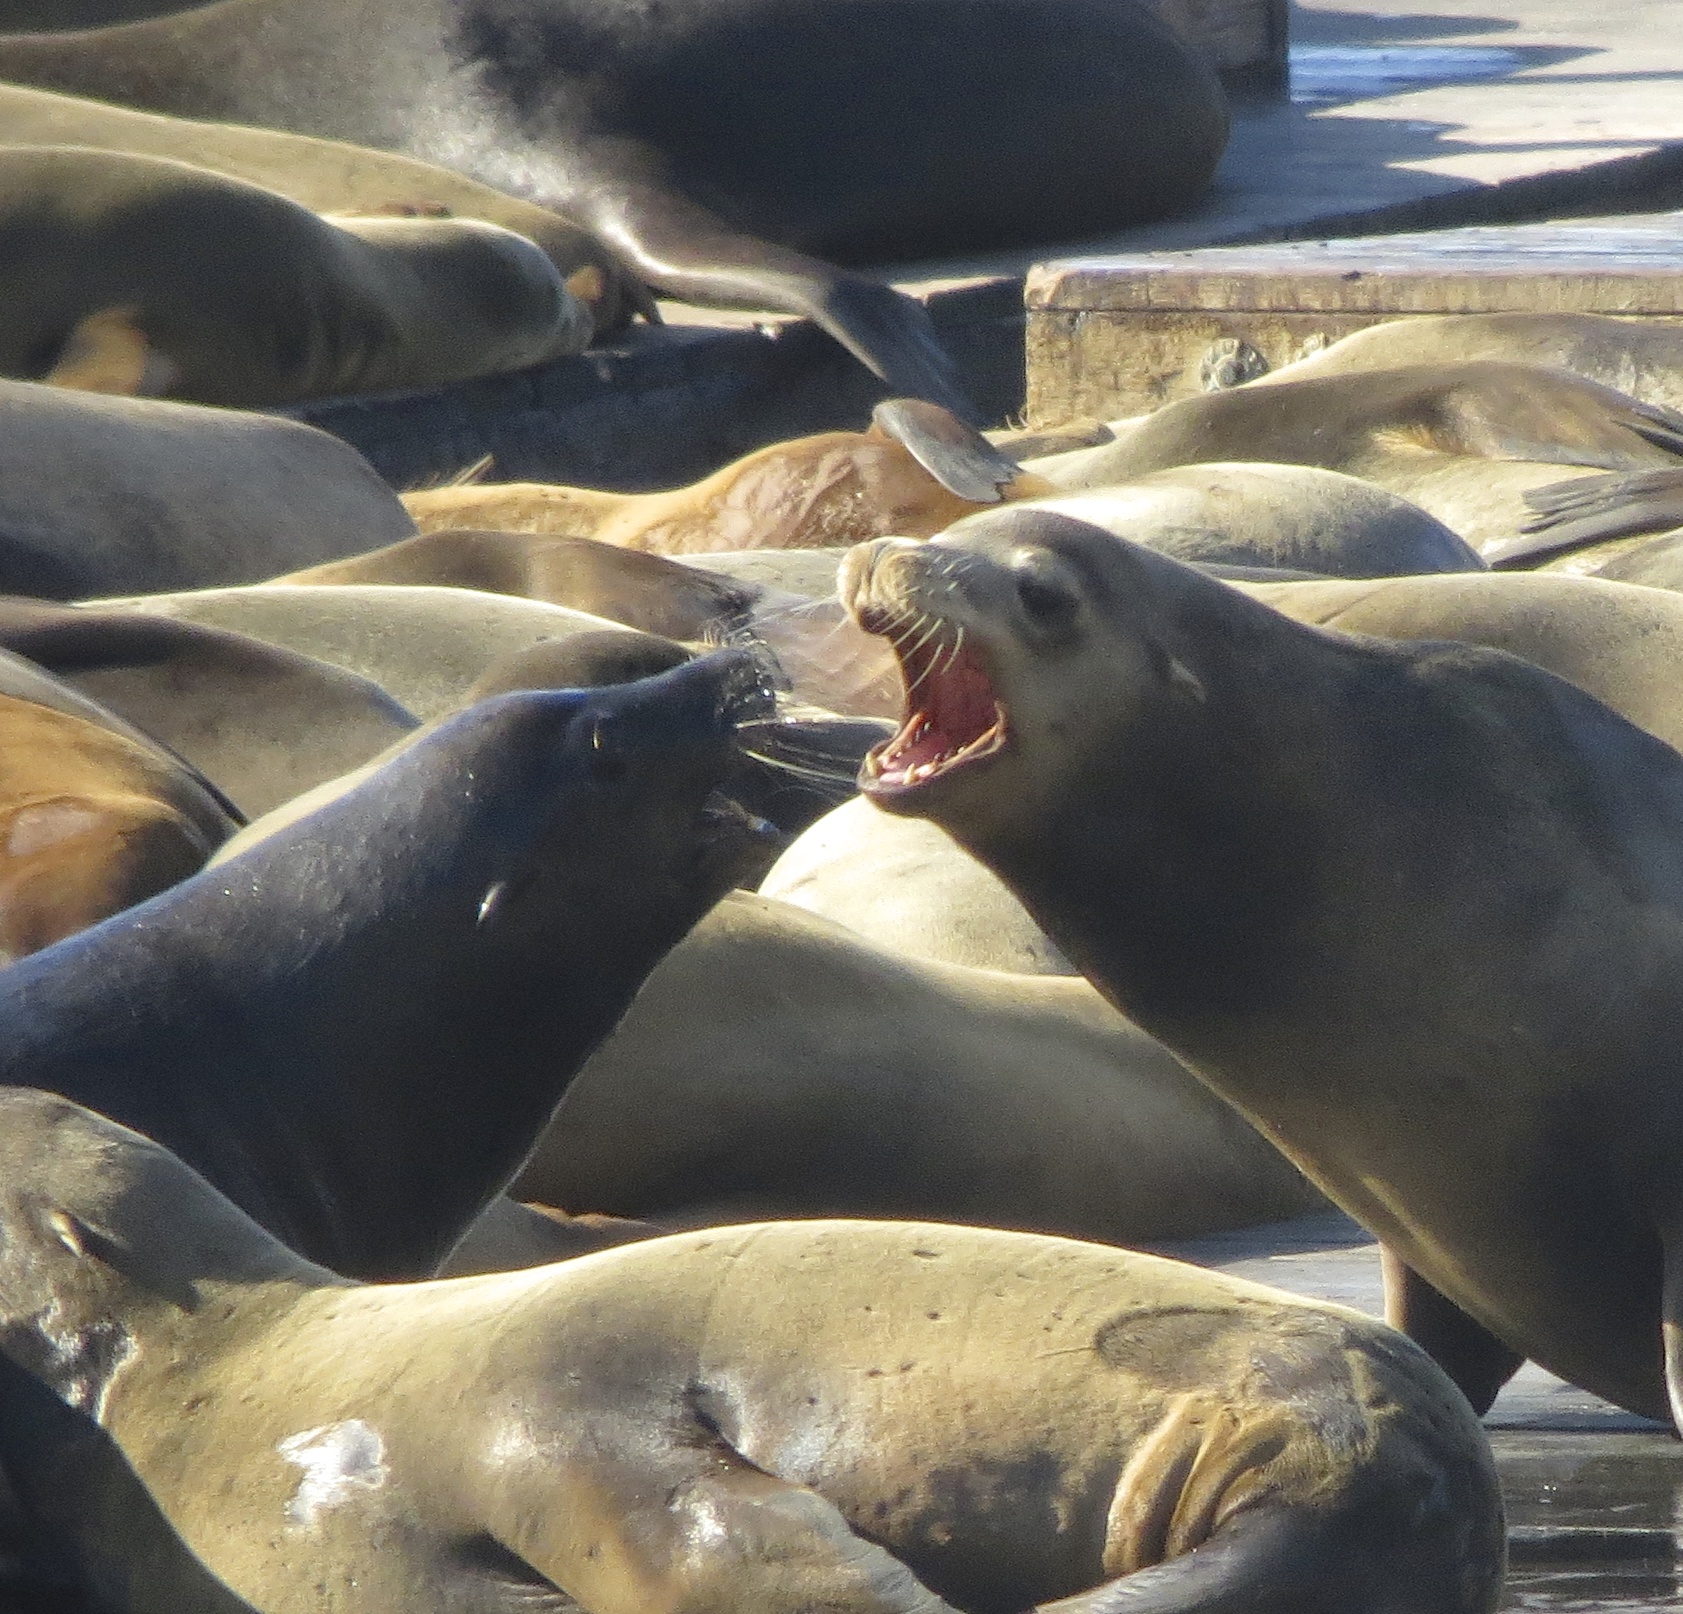 Two Sea Lions Fighting Over A Grape